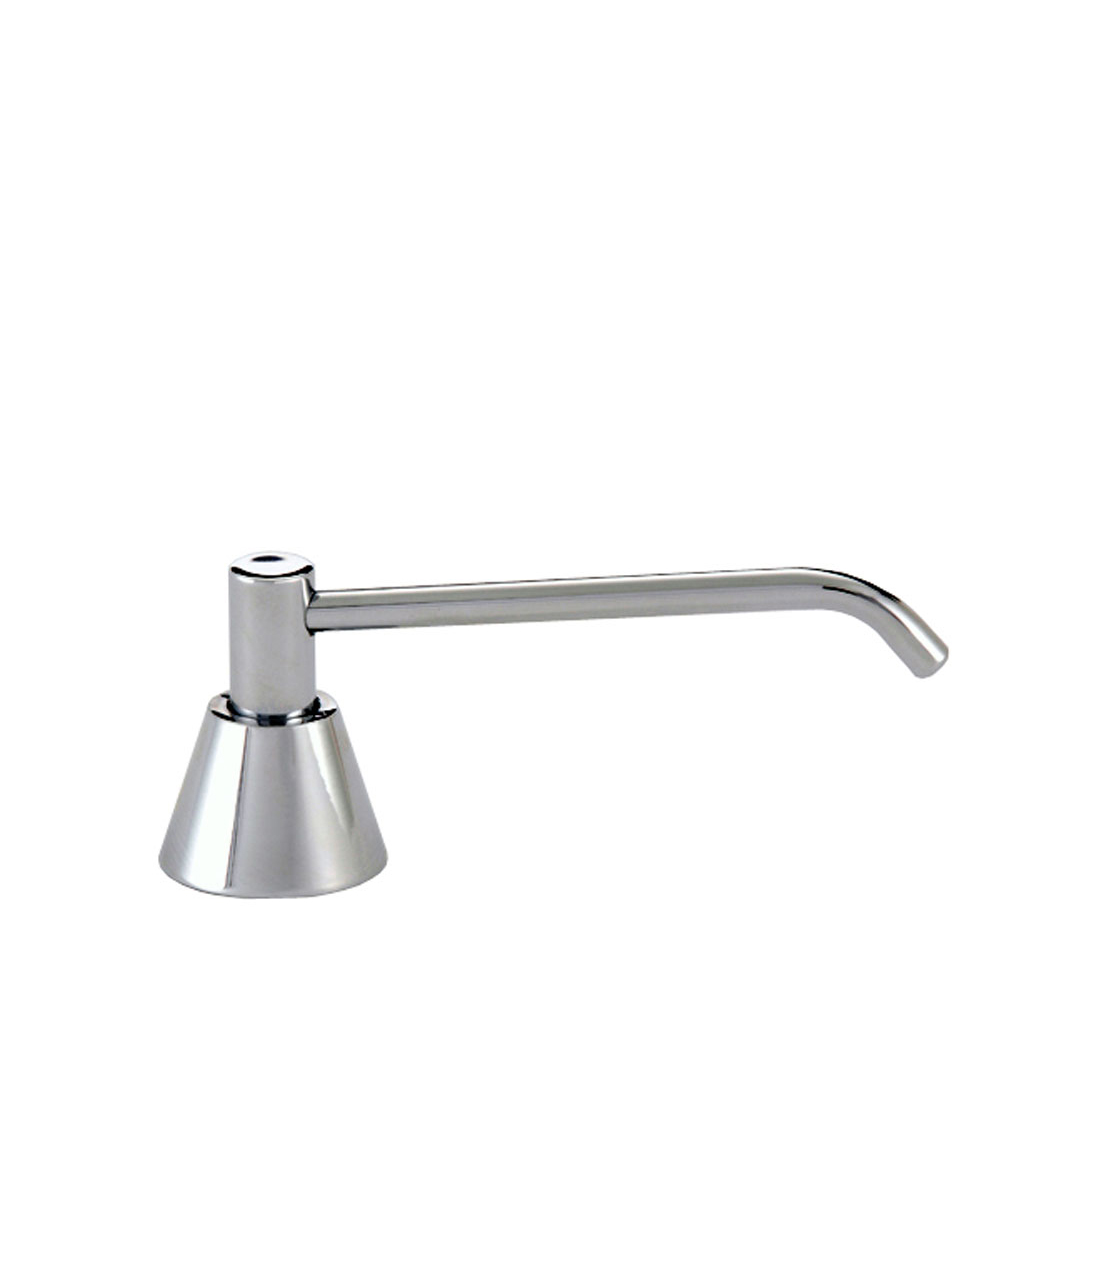 Basin-Mounted Soap Dispenser with All-Purpose Valve - (Model #: g-64lb-6)-image